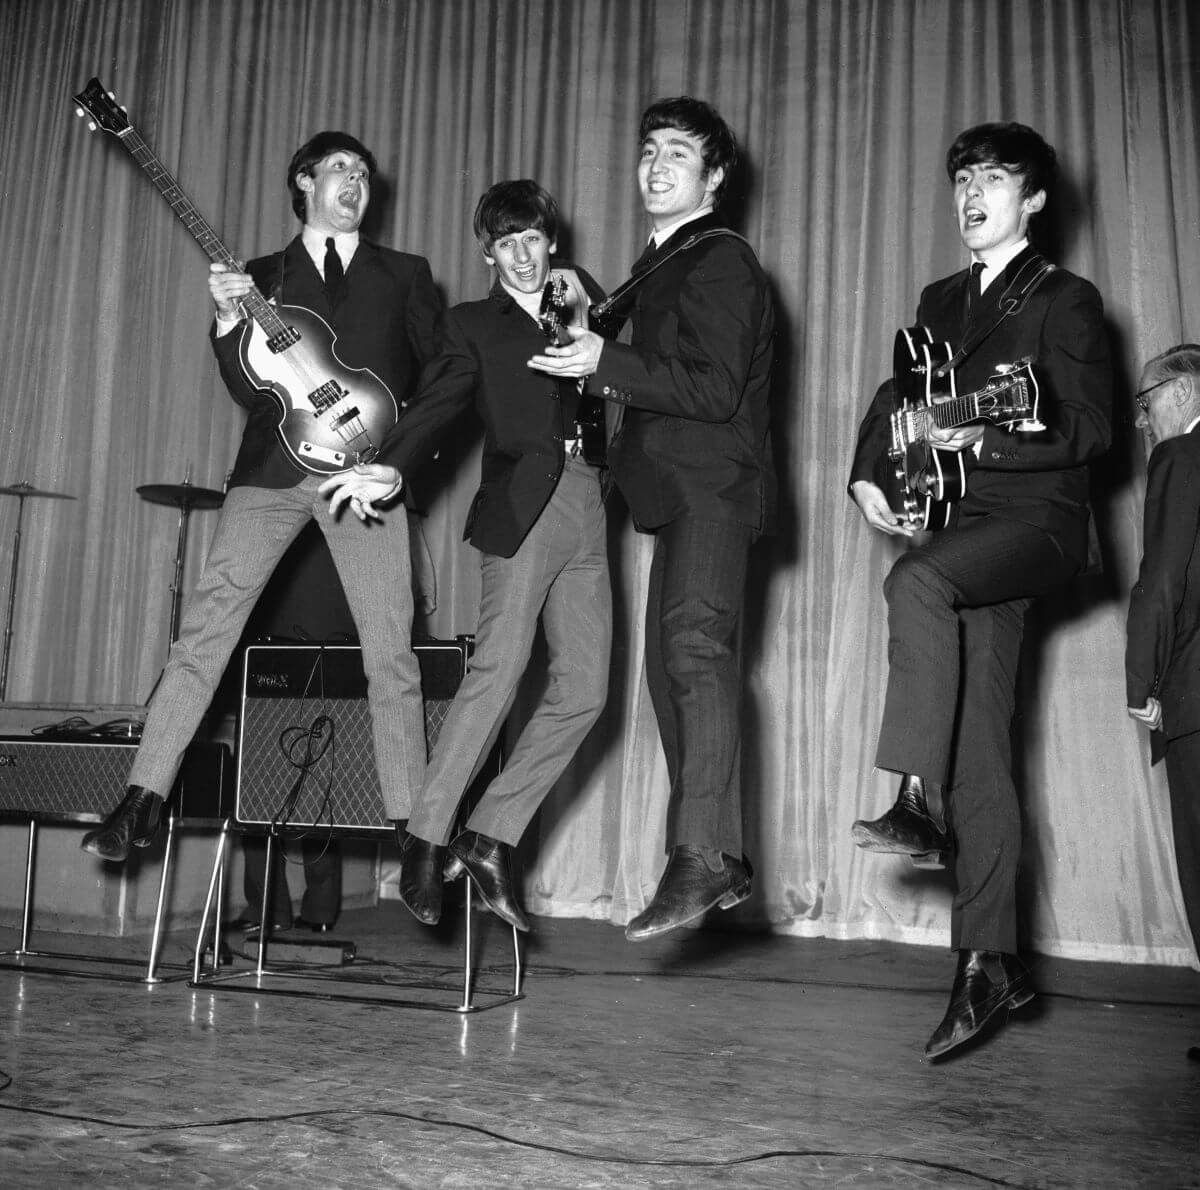 A black and white picture of The Beatles jumping up in the air while on a stage. Paul McCartney, John Lennon, and George Harrison hold guitars.